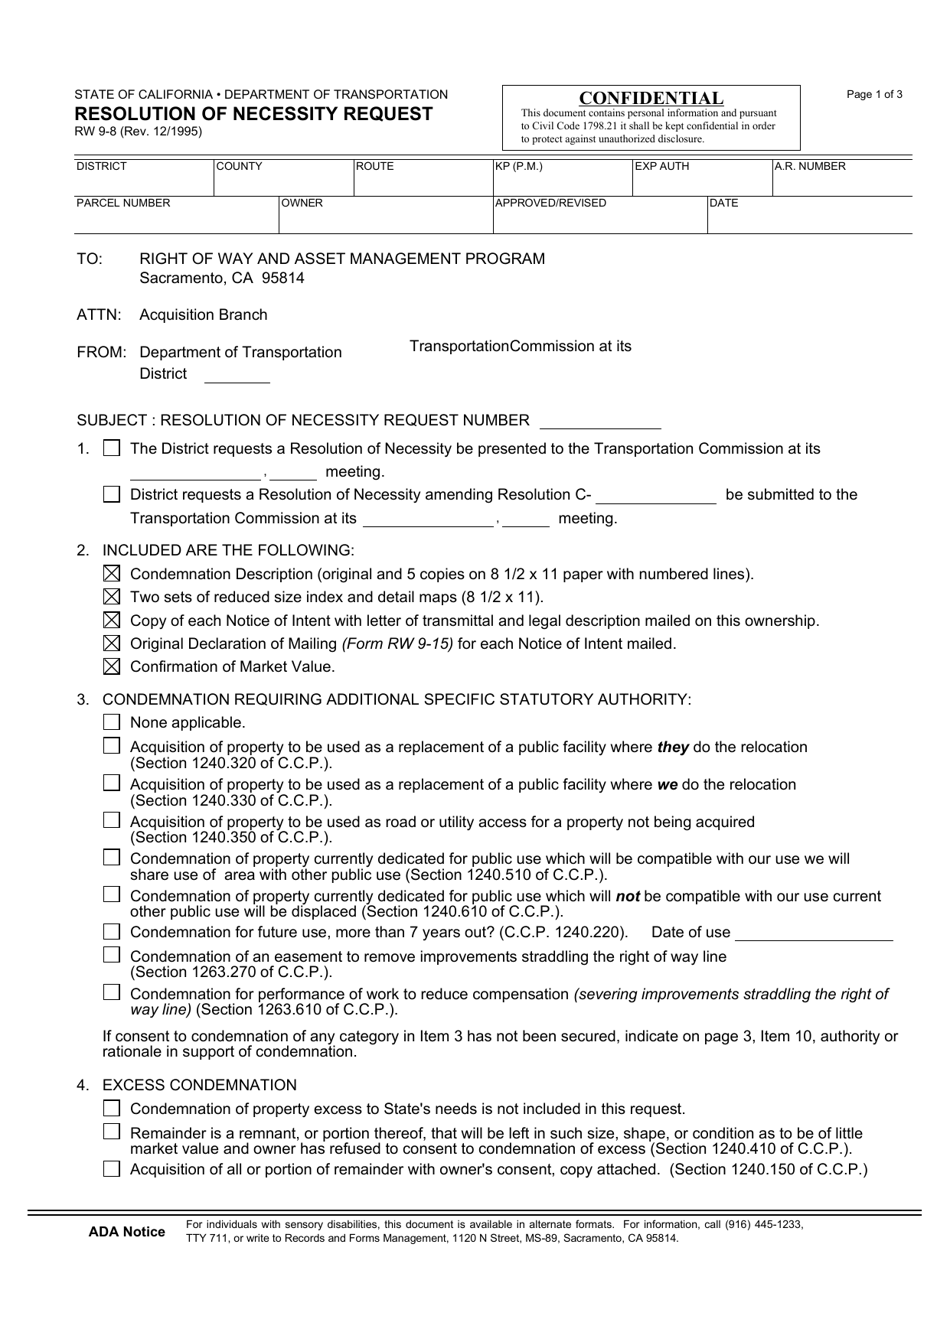 Form RW9-8 Resolution of Necessity Request - California, Page 1